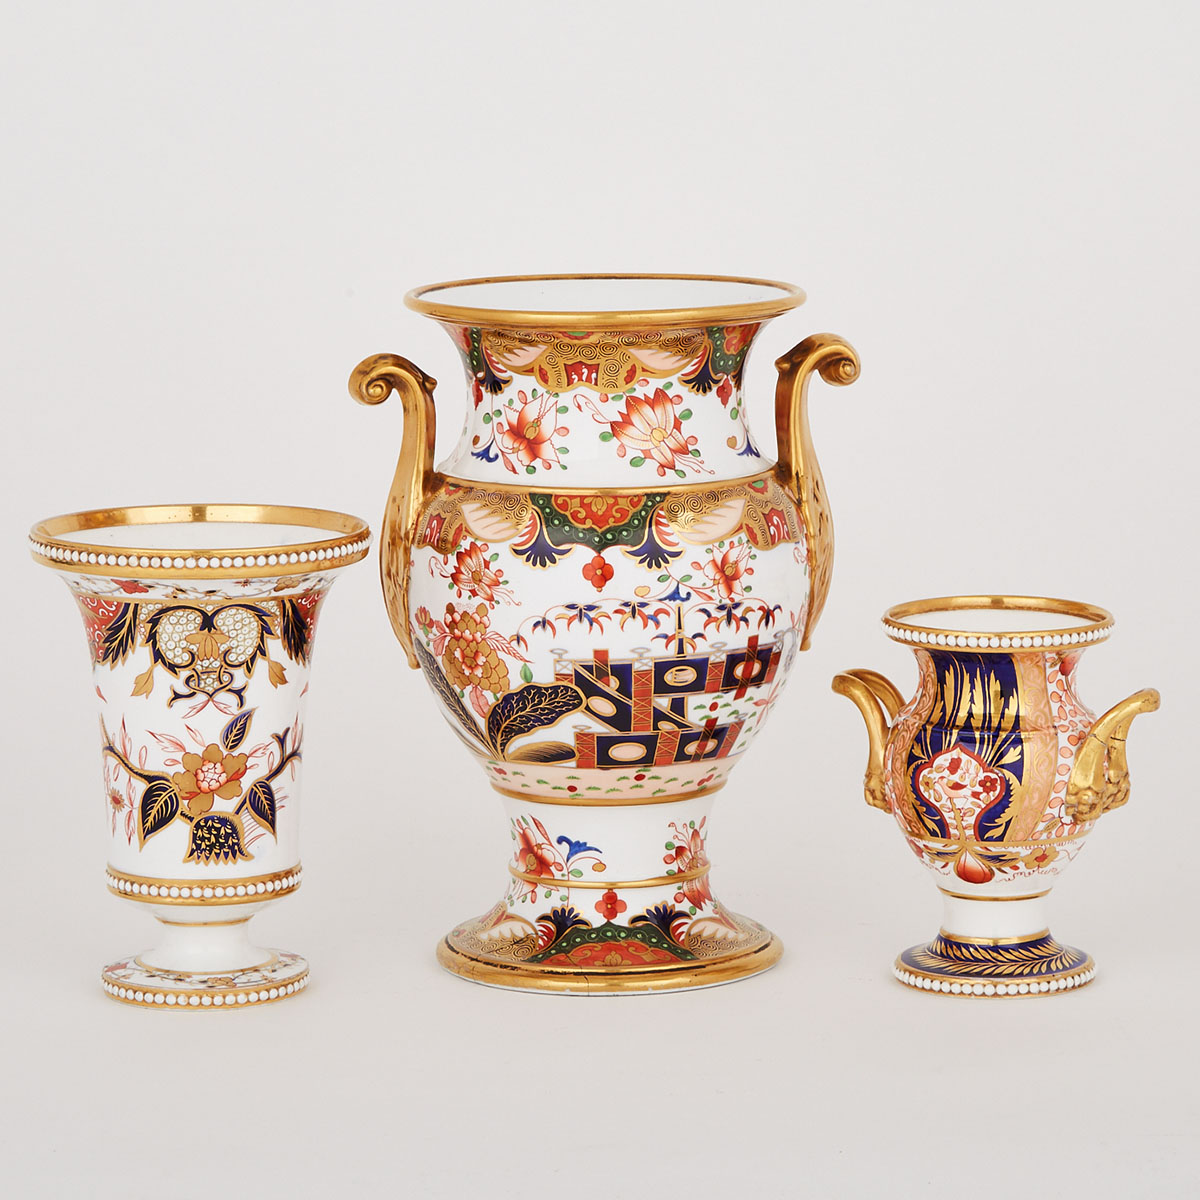 Three Spode Japan Patterned Vases, early 19th century